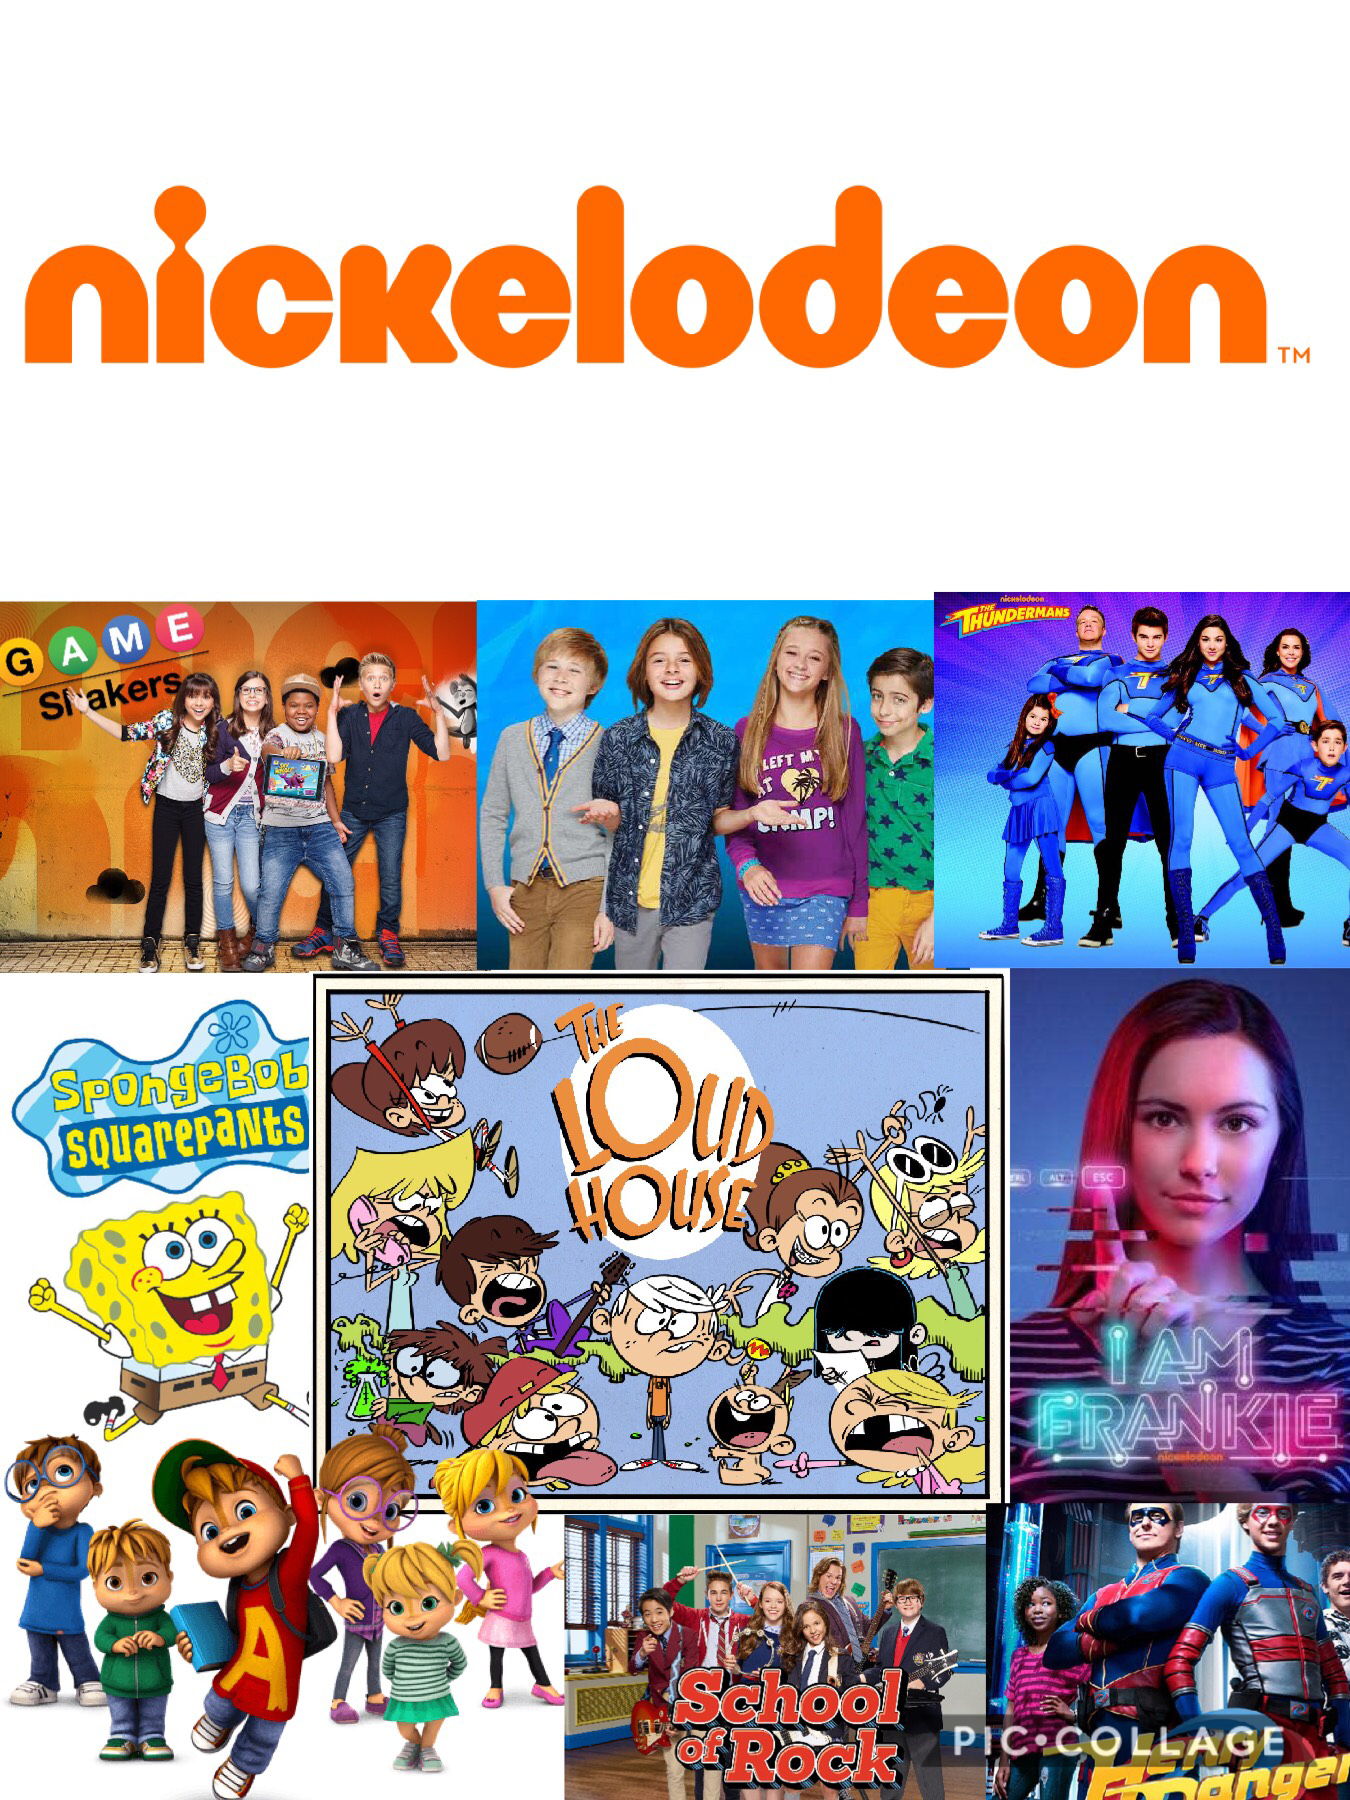 Which one?  

😍 for Game Shakers
🌈 for Nicky,Ricky,Dicky and Dawn
❤️ for The Thundermans
🥳for The Loud House
😂for Henry Danger
🤩for Alvin and the Chipmunks 
🥰for I’m Frankie
😎for School of rock
😂for Spongebob Squarepants

I vote 🥳